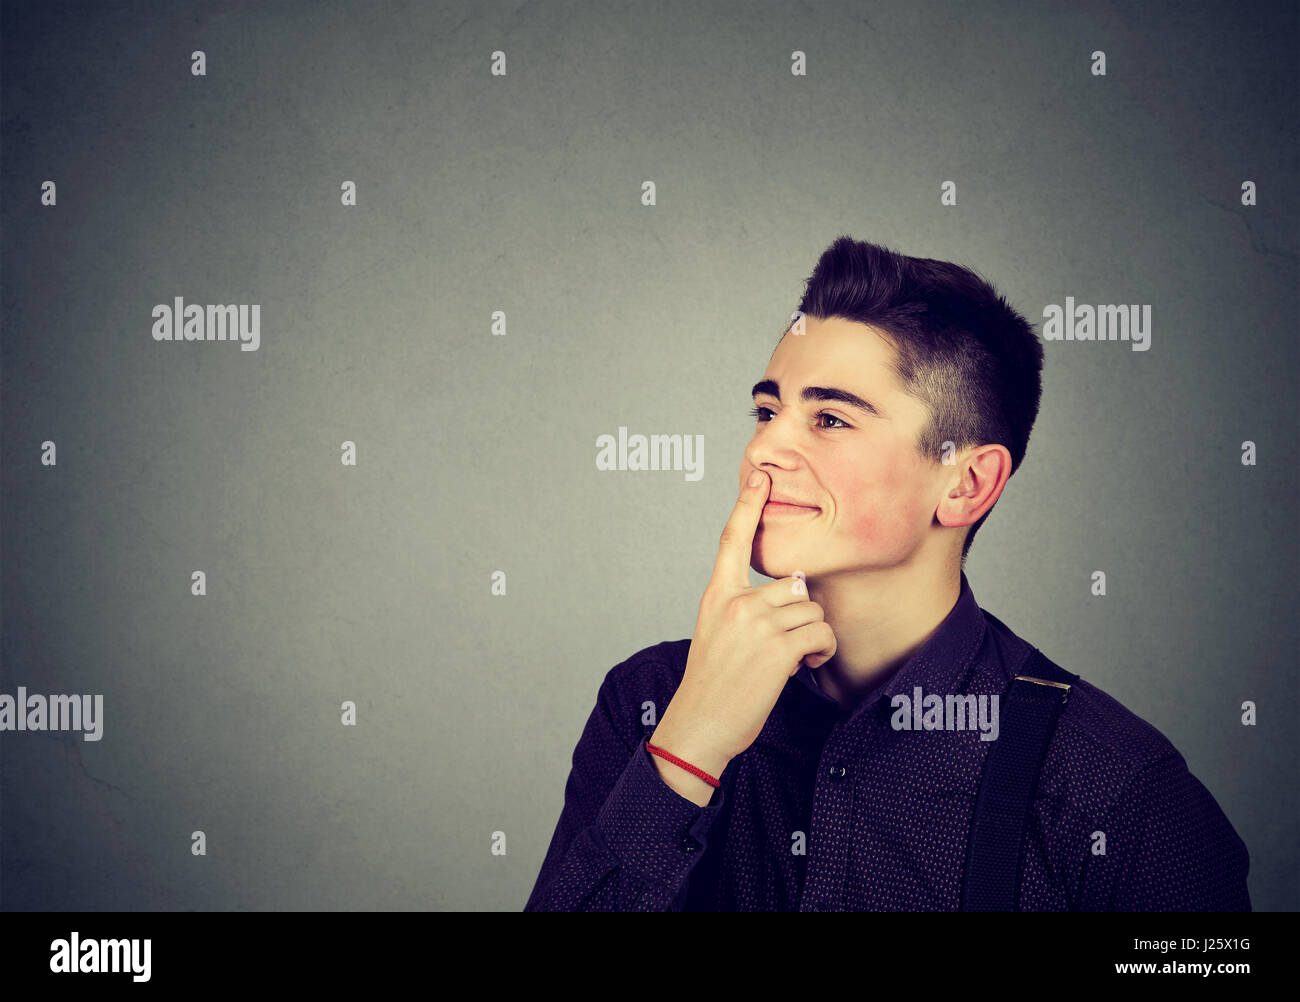 Portrait of a handsome young man thinking isolated on gray background Stock Photo